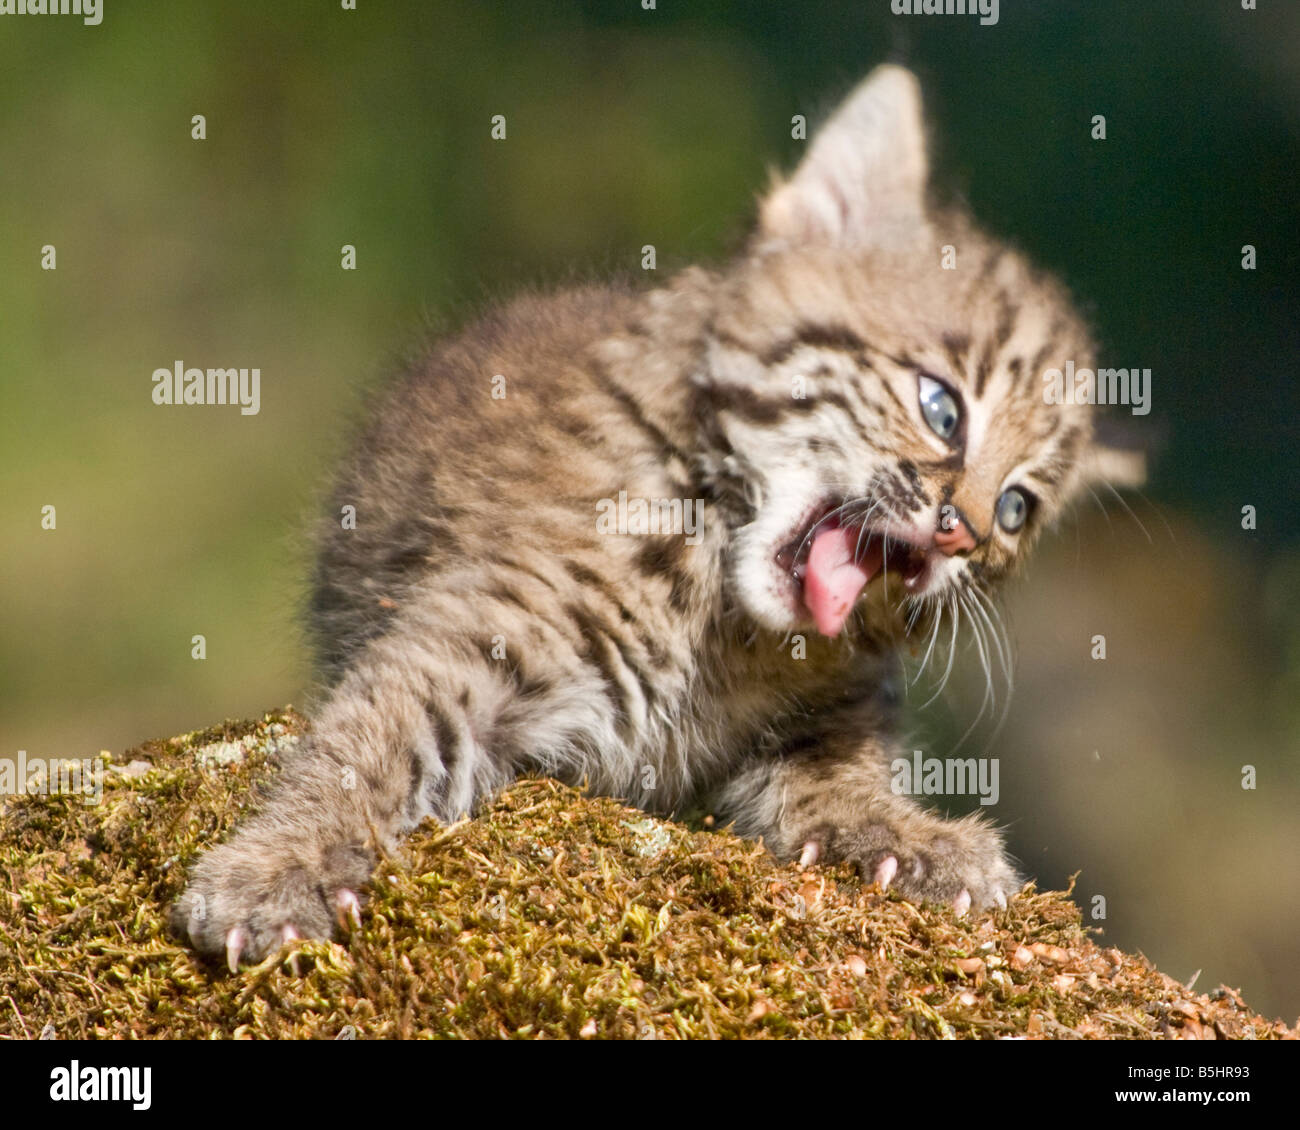 Bobcat kitten makes a funny face - controlled conditions Stock Photo